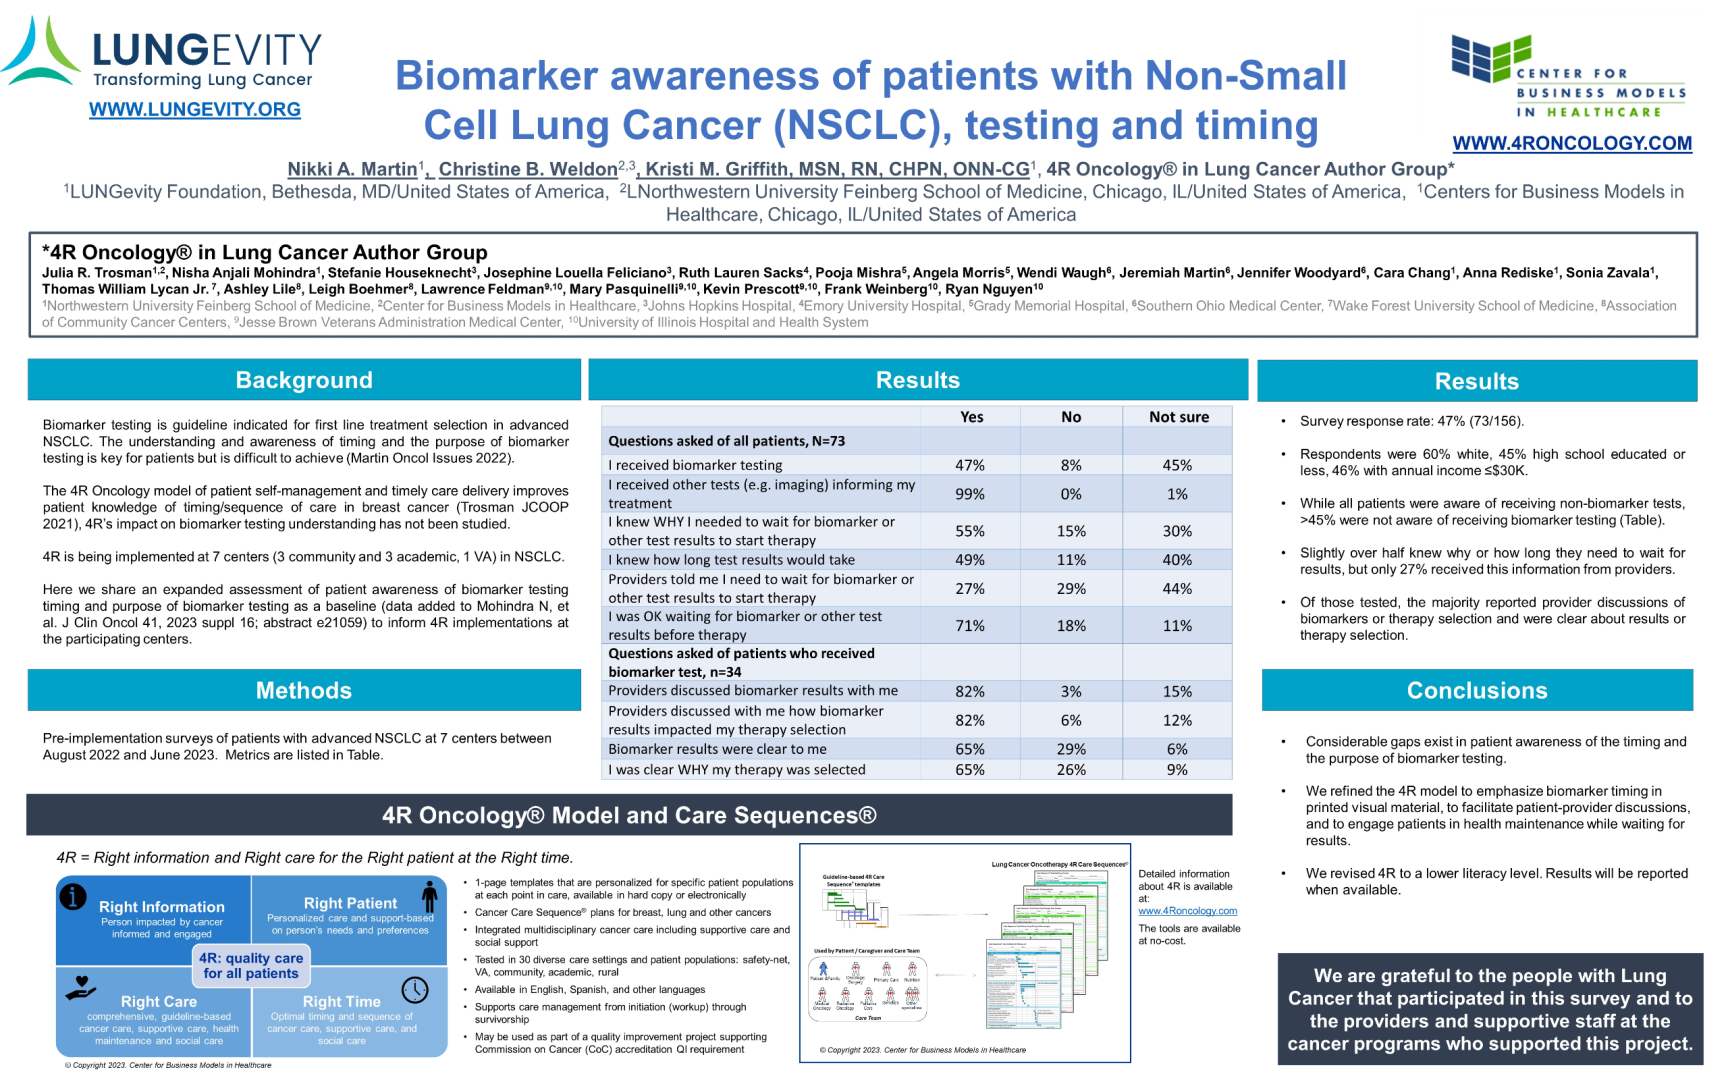 JL1101P: Biomarker Awareness of Patients With Non-Small Cell Lung Cancer icon